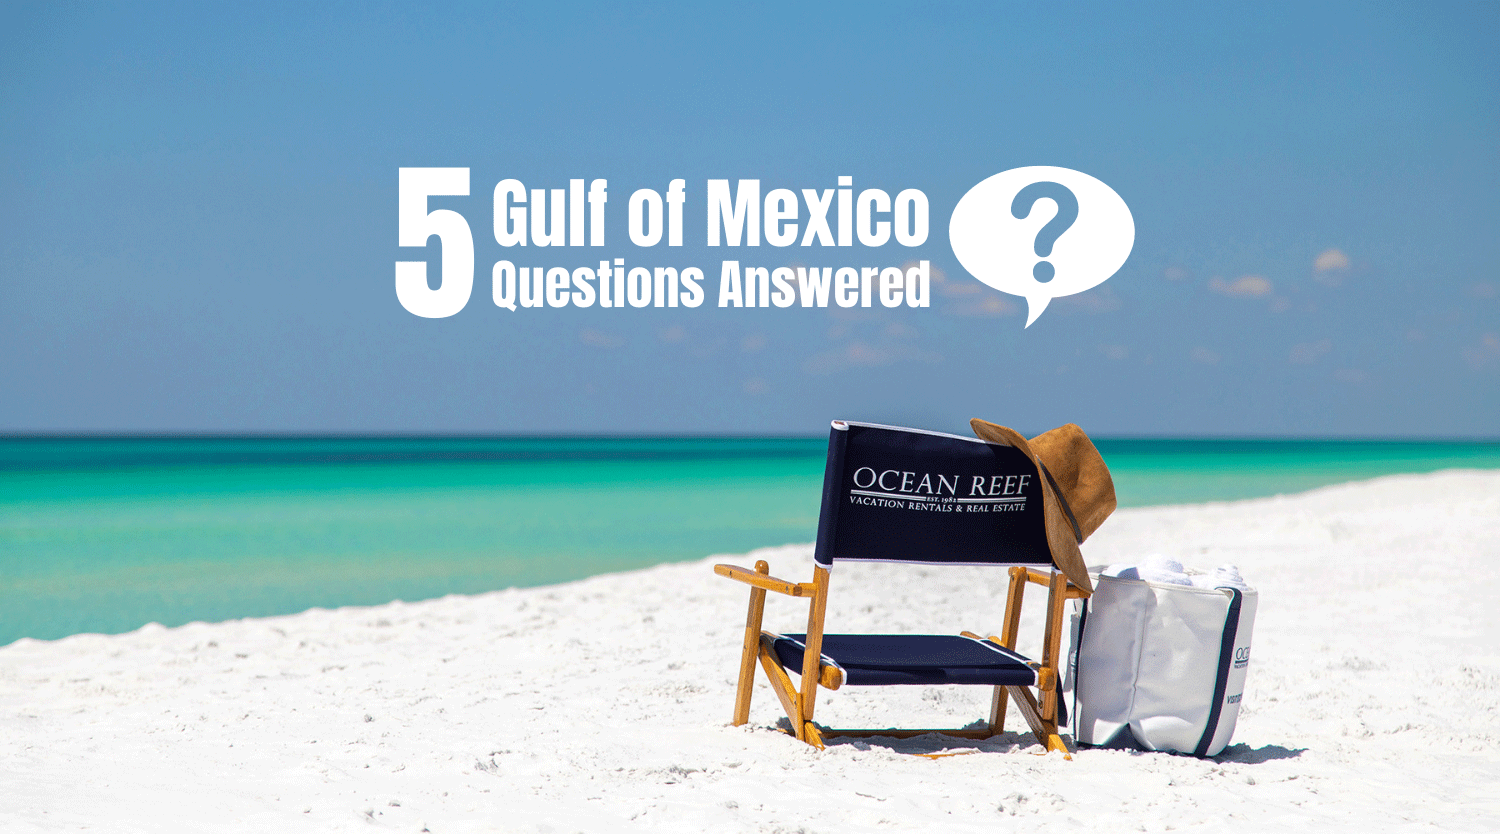 Gulf Of Mexico Questions